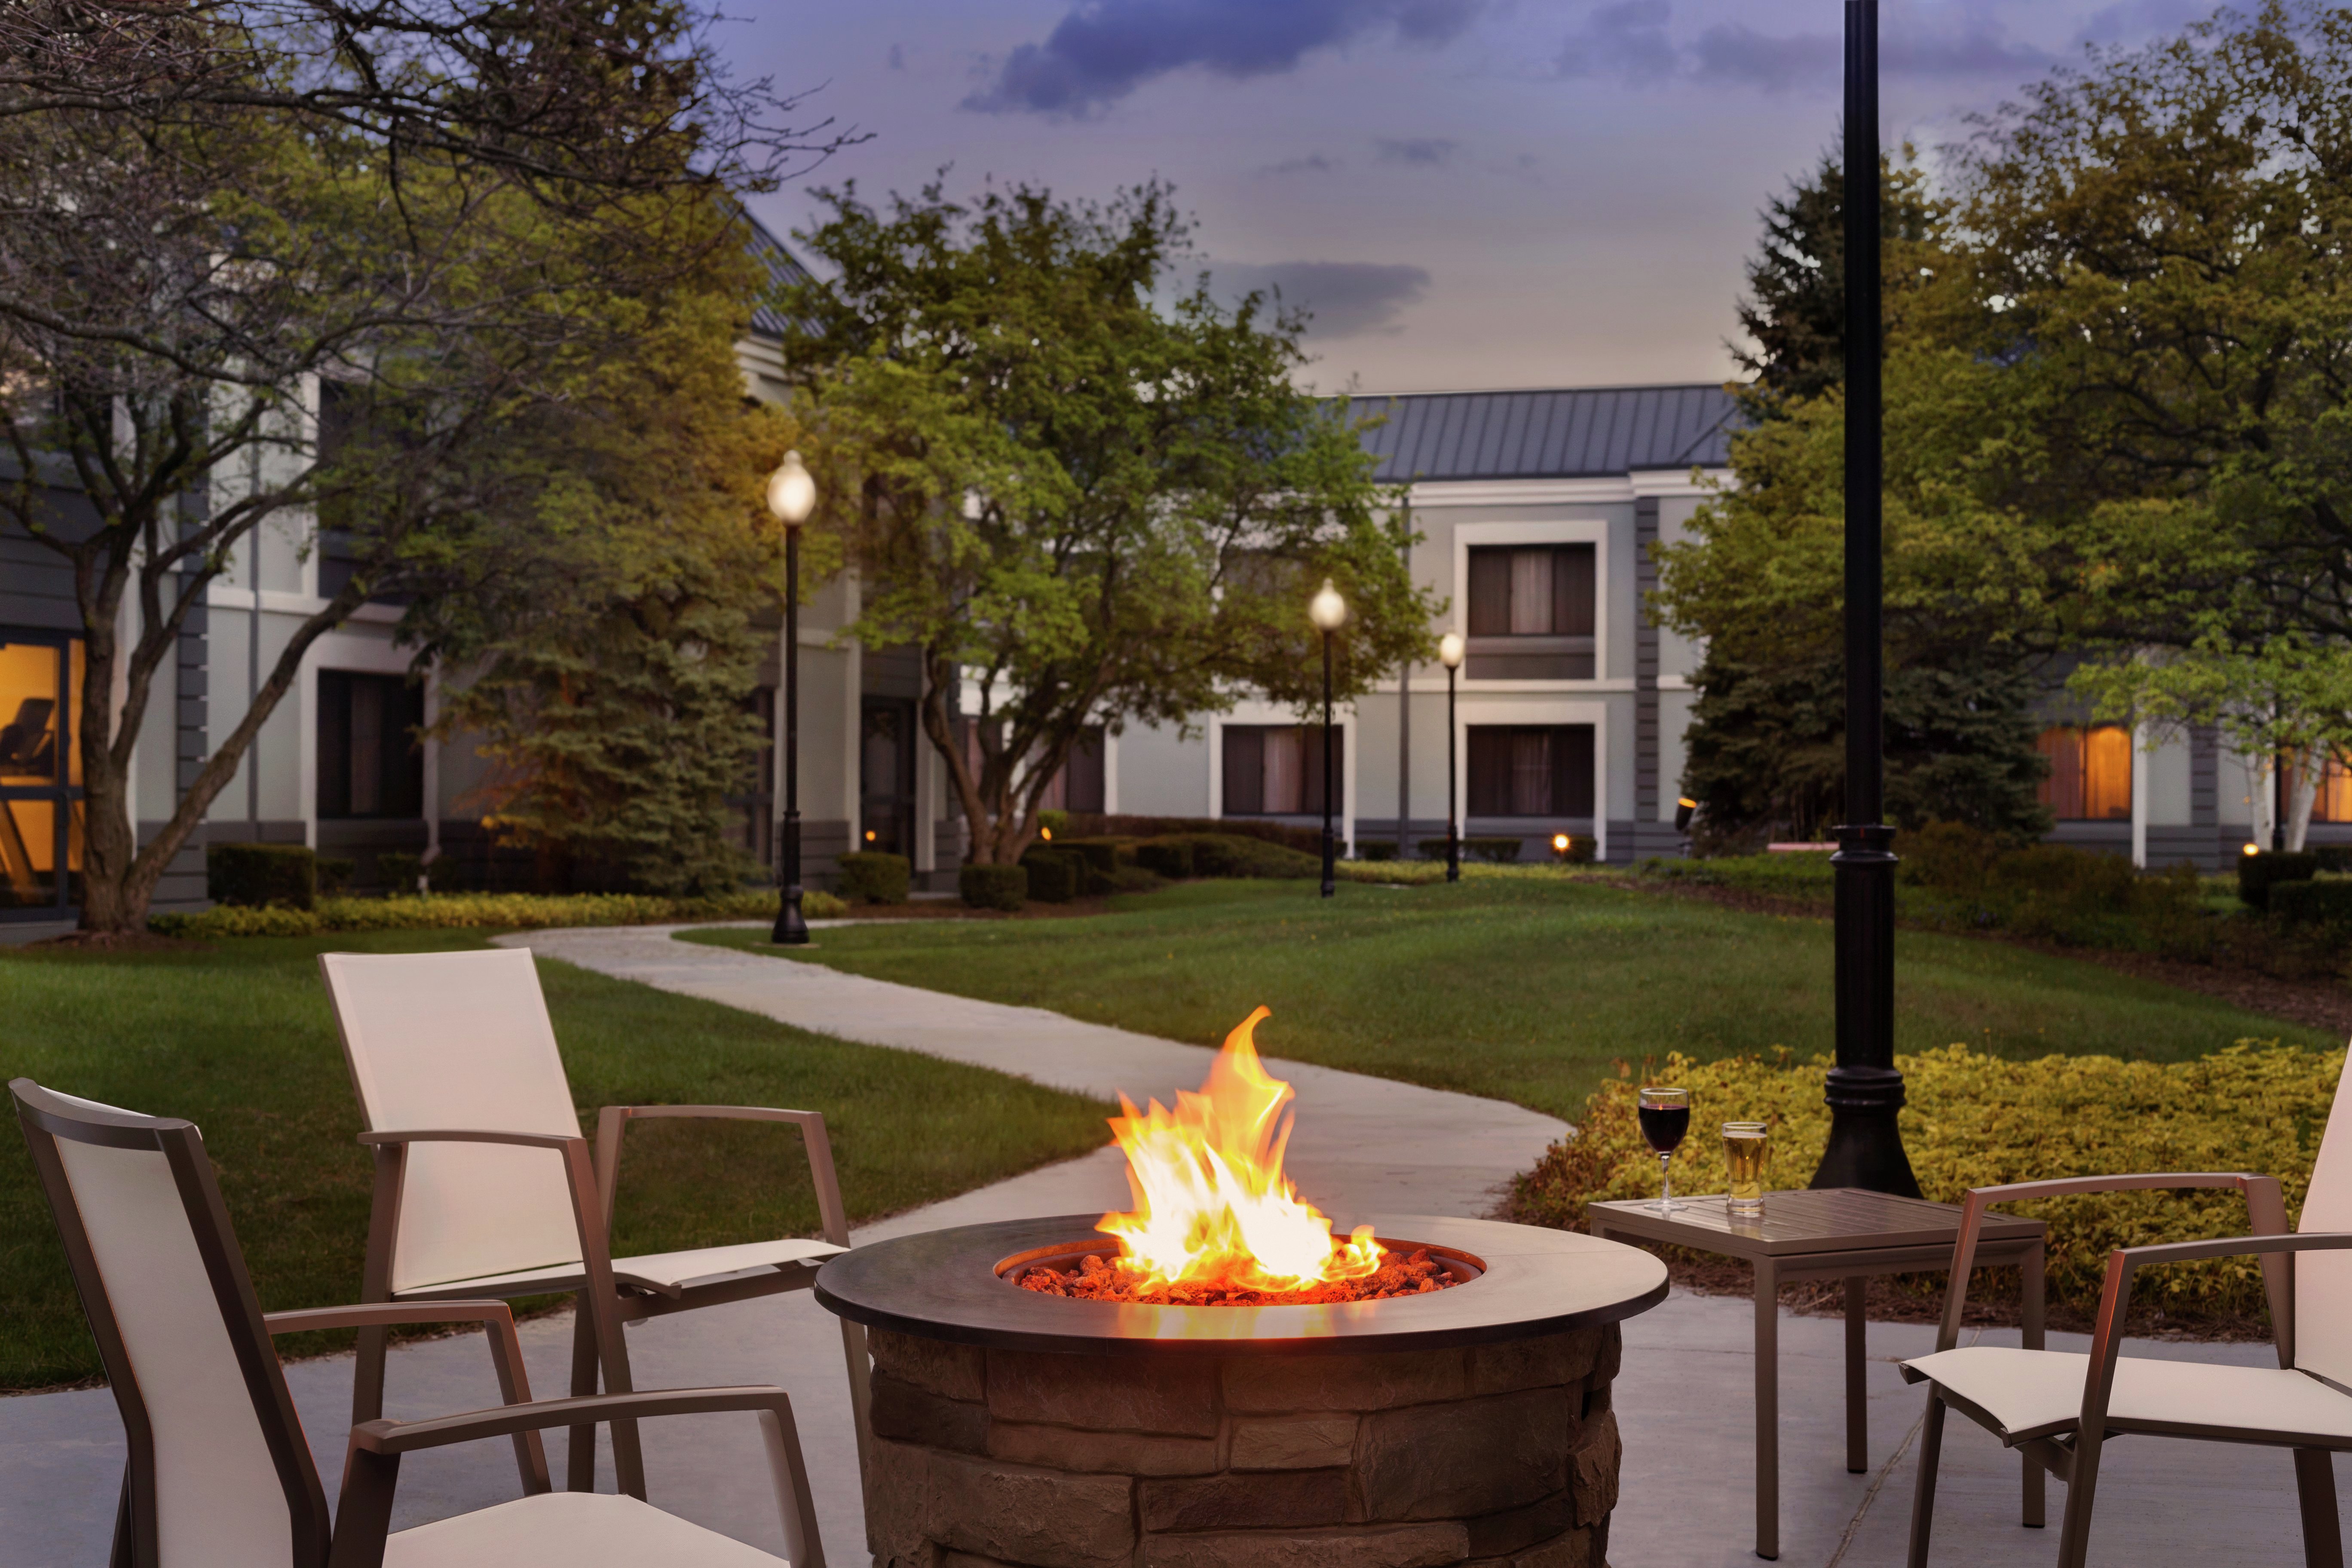 Hotel Patio Area with Fire Pit